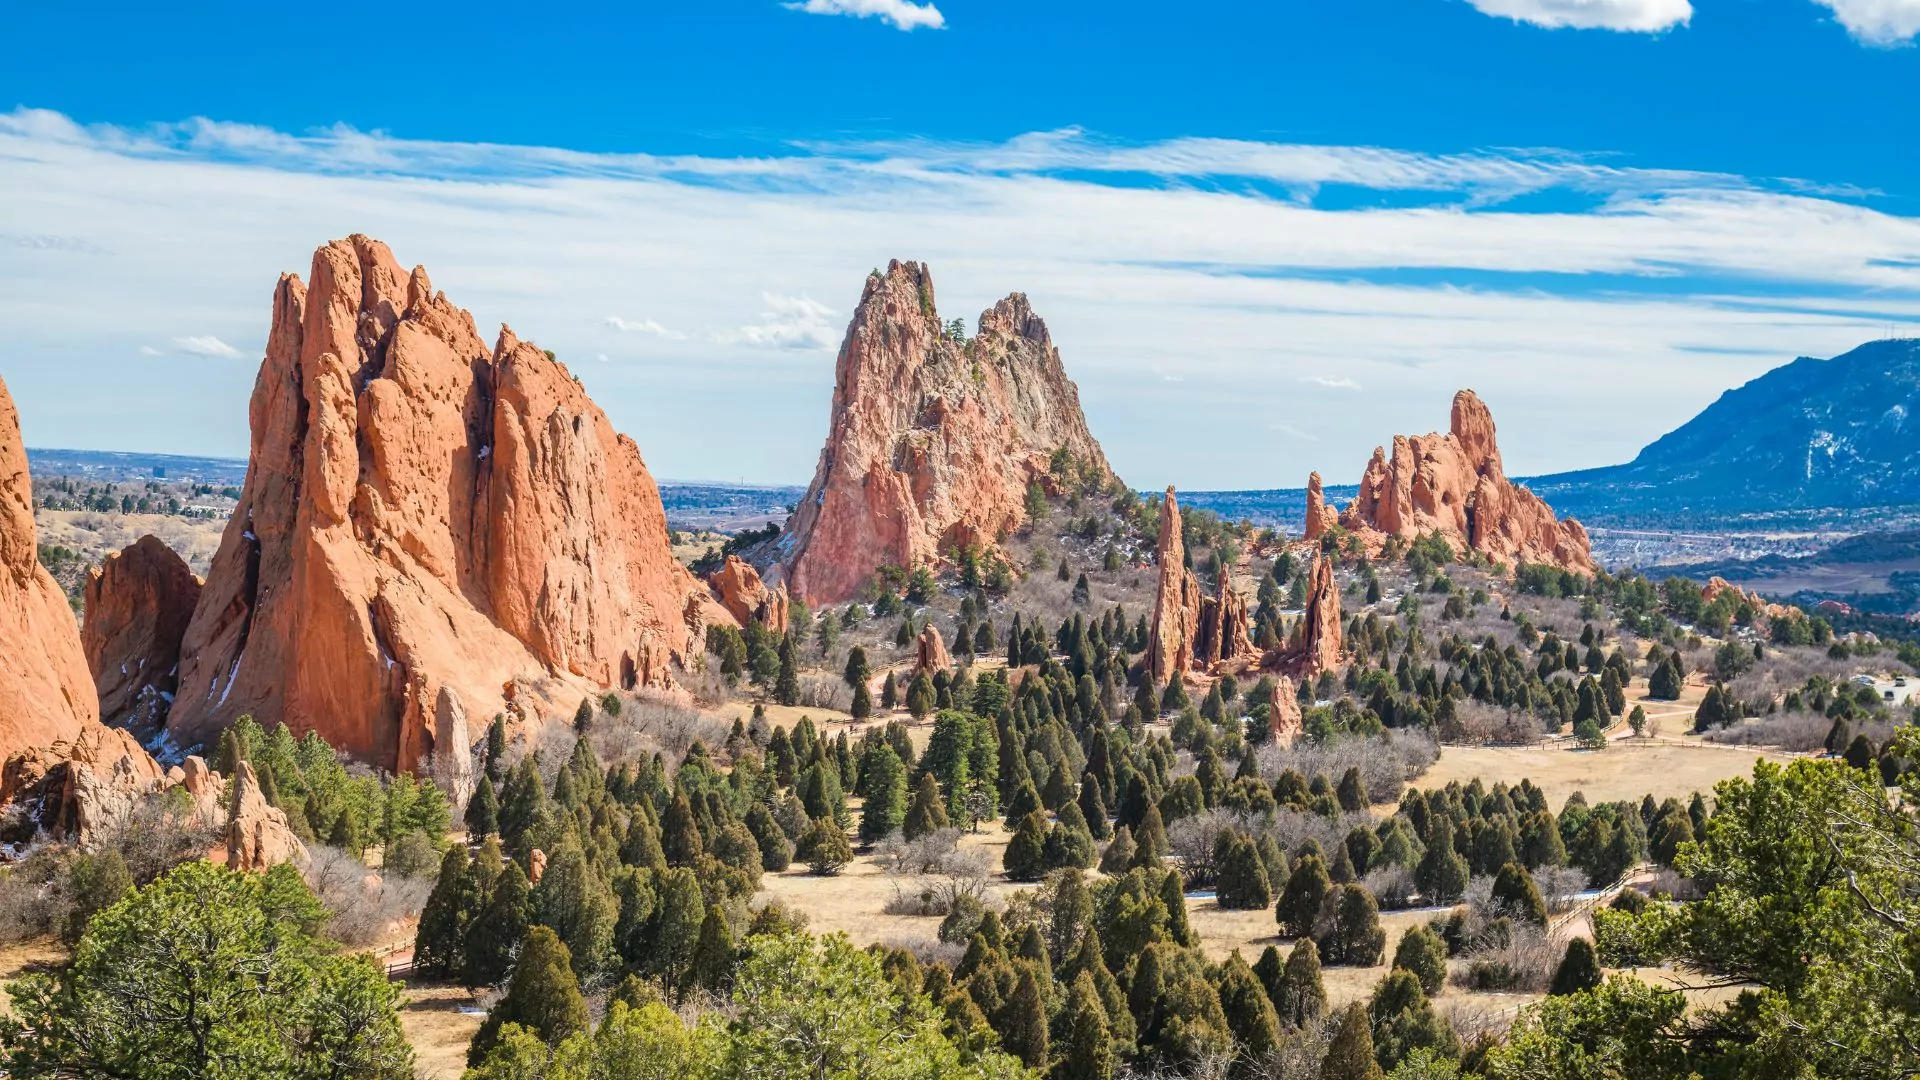 Tall d rock formations rise out of pine forests at Garden of the Gods park in Colorado Springs, Colorado